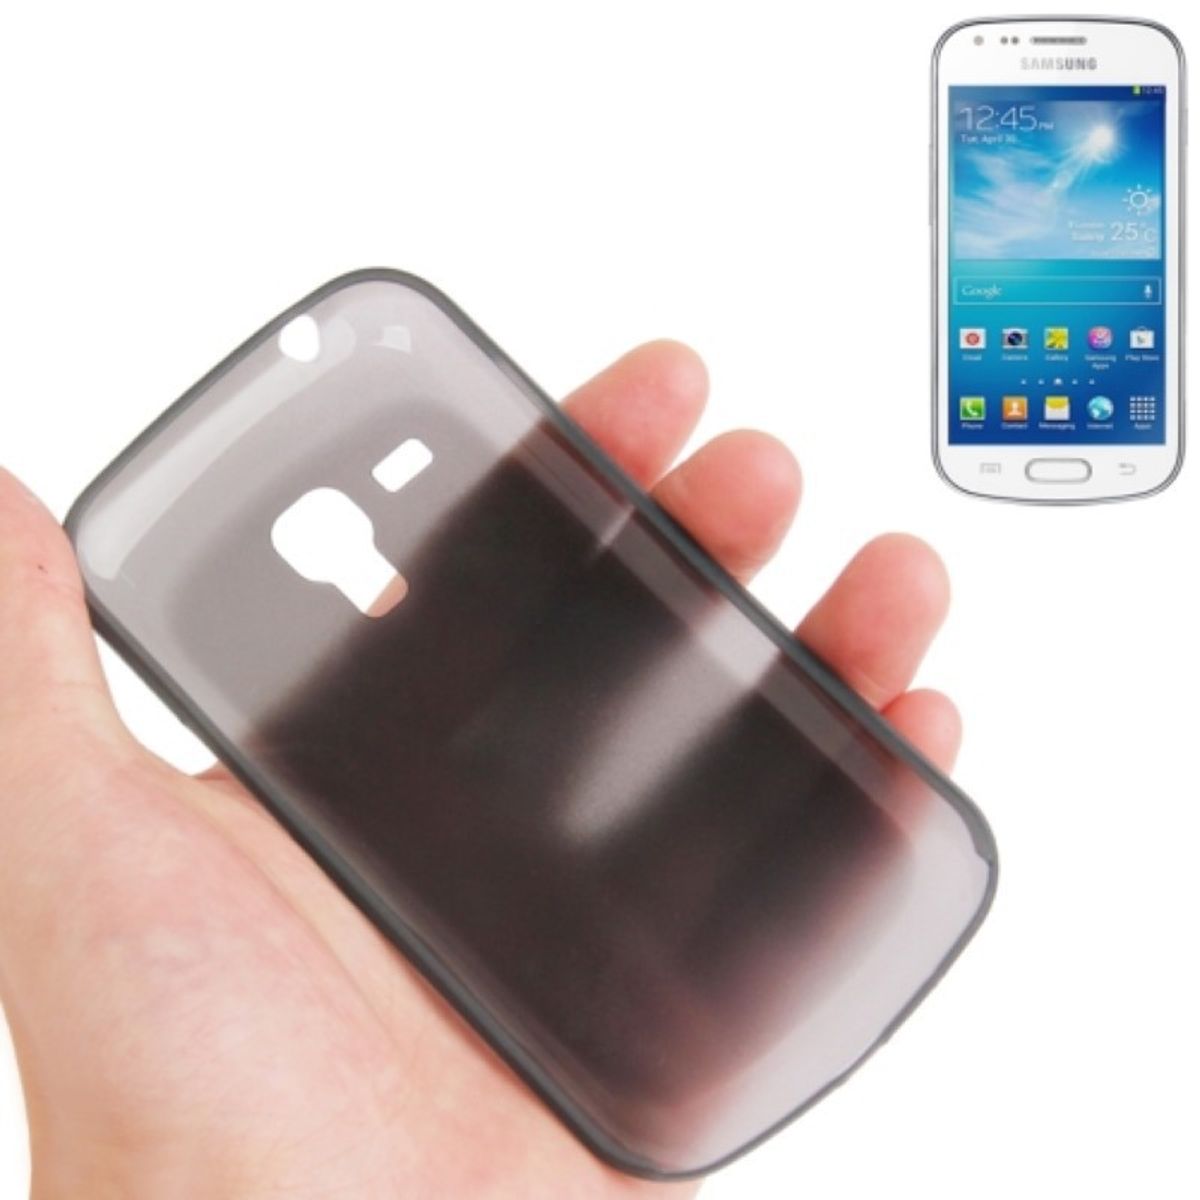 Protective case ultra thin 0.3 mm for mobile phone Samsung Galaxy Trend Duos / S7562 black transparent